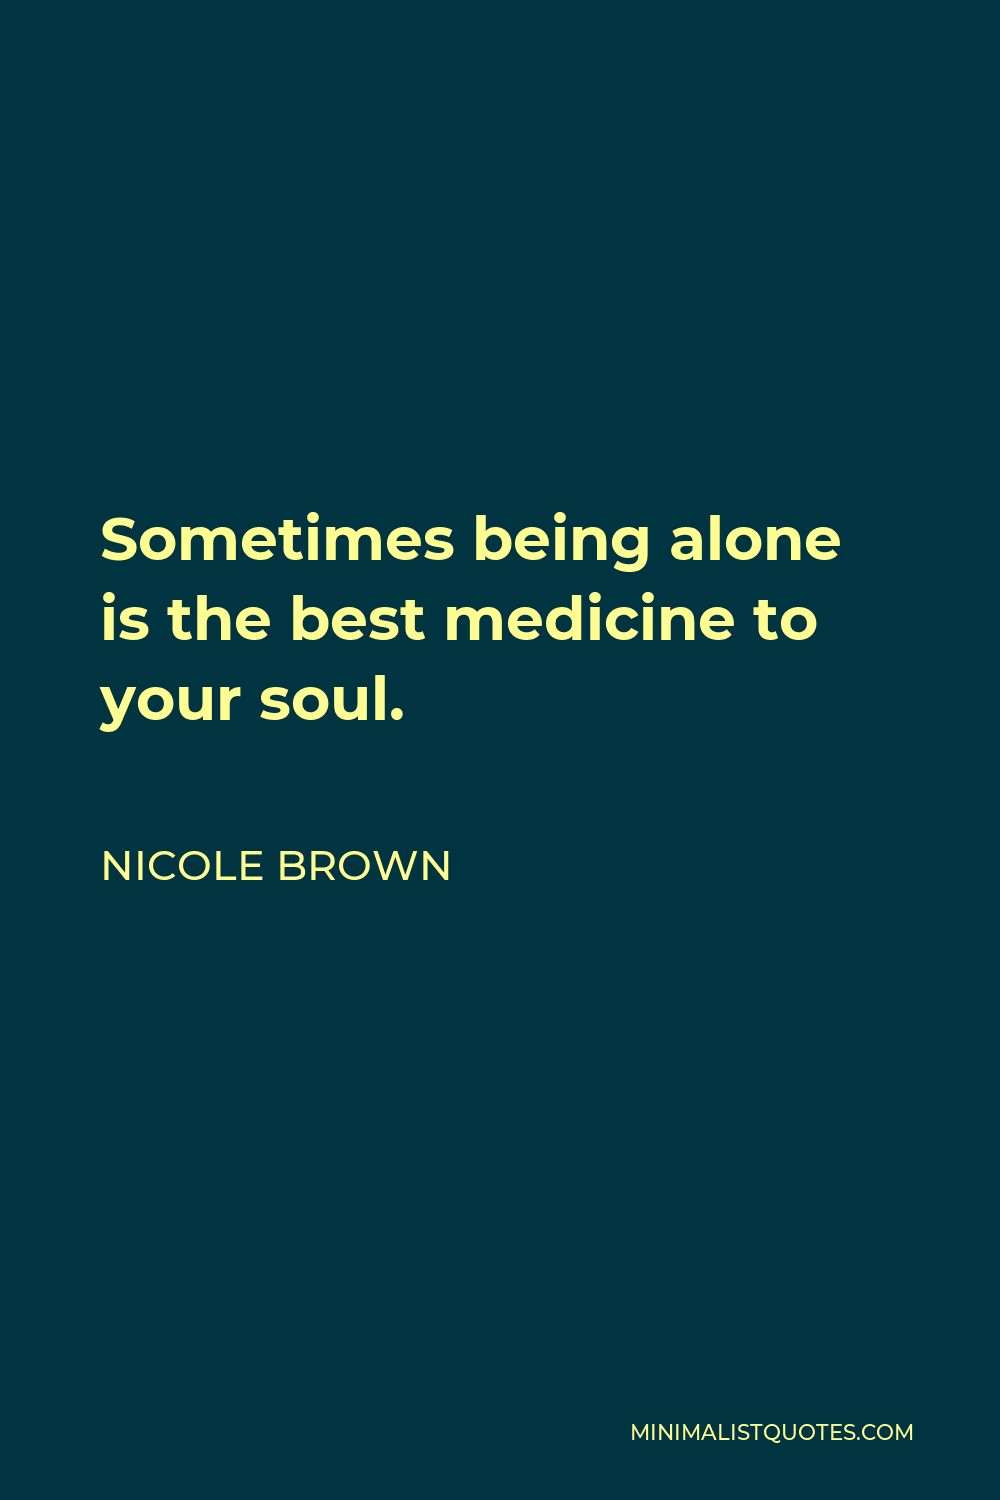 Nicole Brown Quote: Sometimes being alone is the best medicine to ...